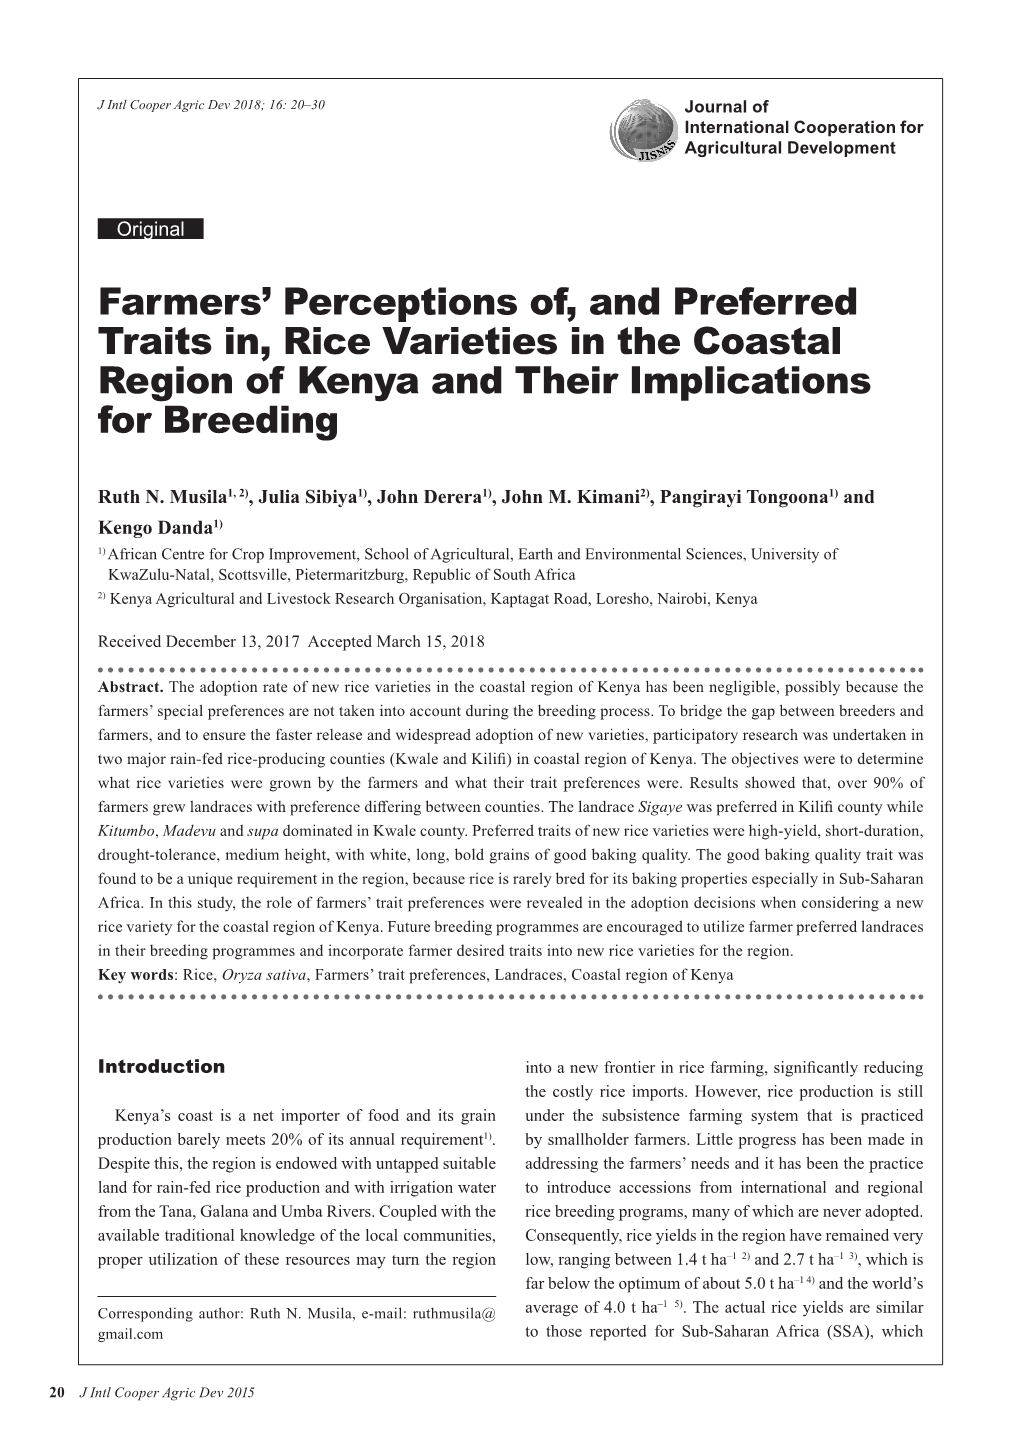 Farmers' Perceptions Of, and Preferred Traits In, Rice Varieties in the Coastal Region of Kenya and Their Implications For